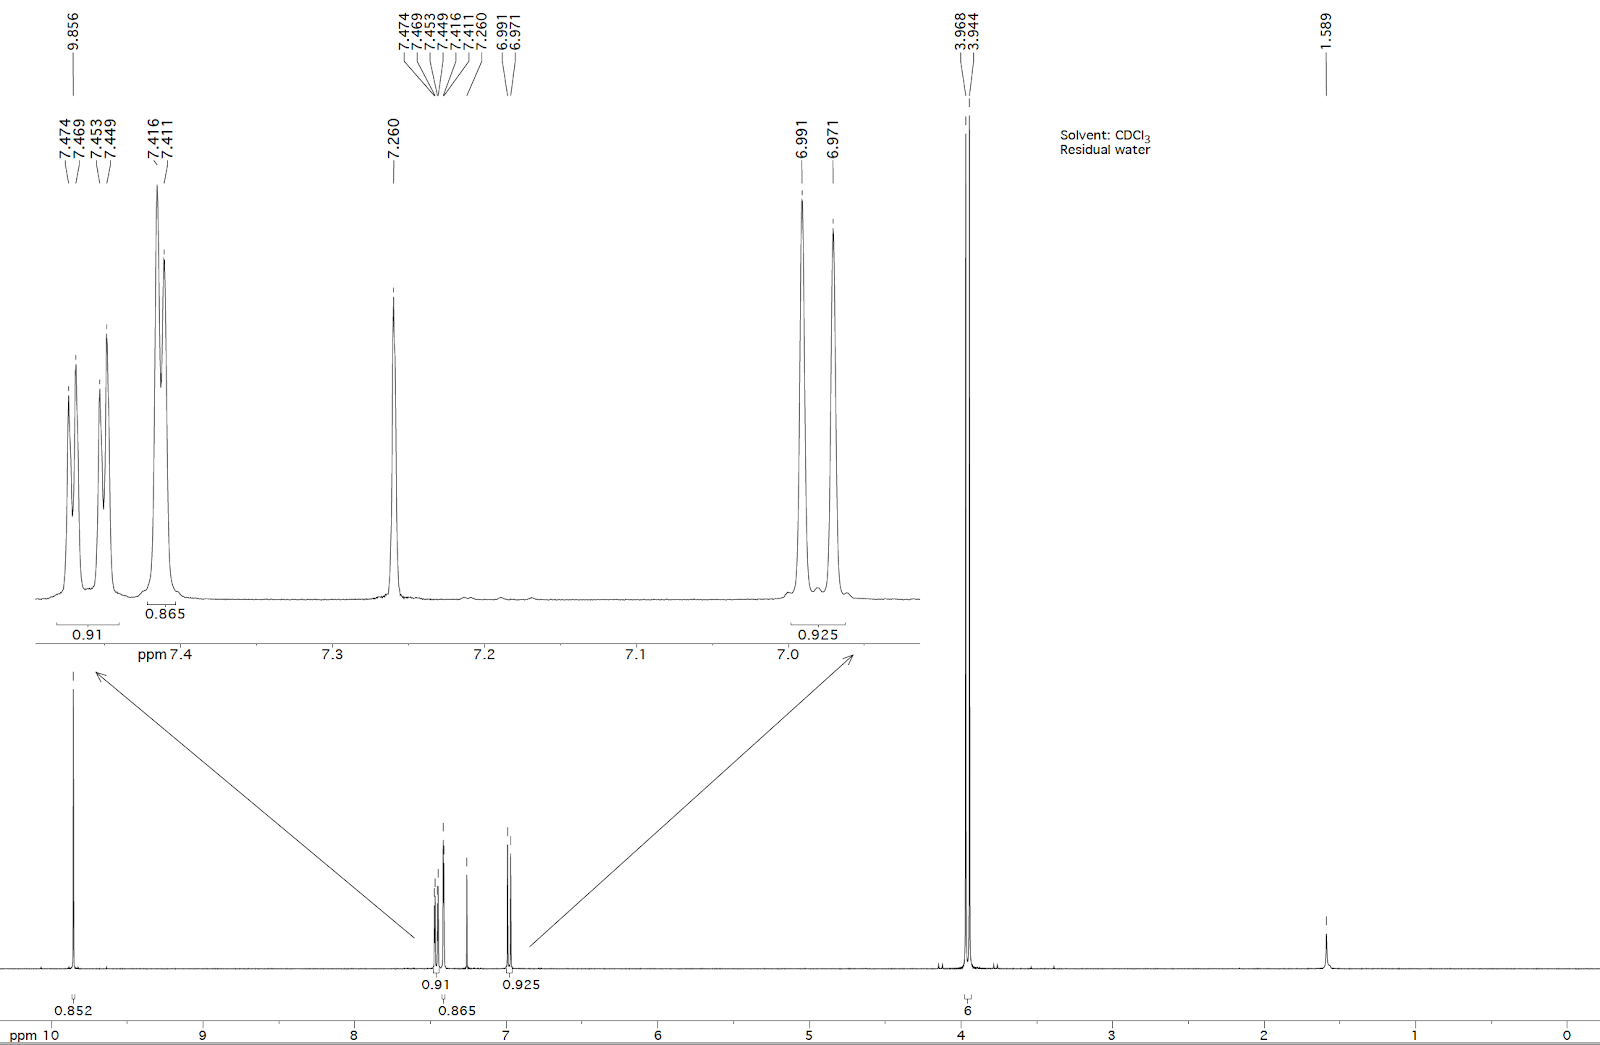 NNNNNNN Solvent: CDCl Residual water 0.865 0.925 7.0 0.91 7.2 7.1 7.3 ppm 7.4 0.925 0.91 0.852 0.865 6 7 9 6 4 8 ppm 10 - 9.8